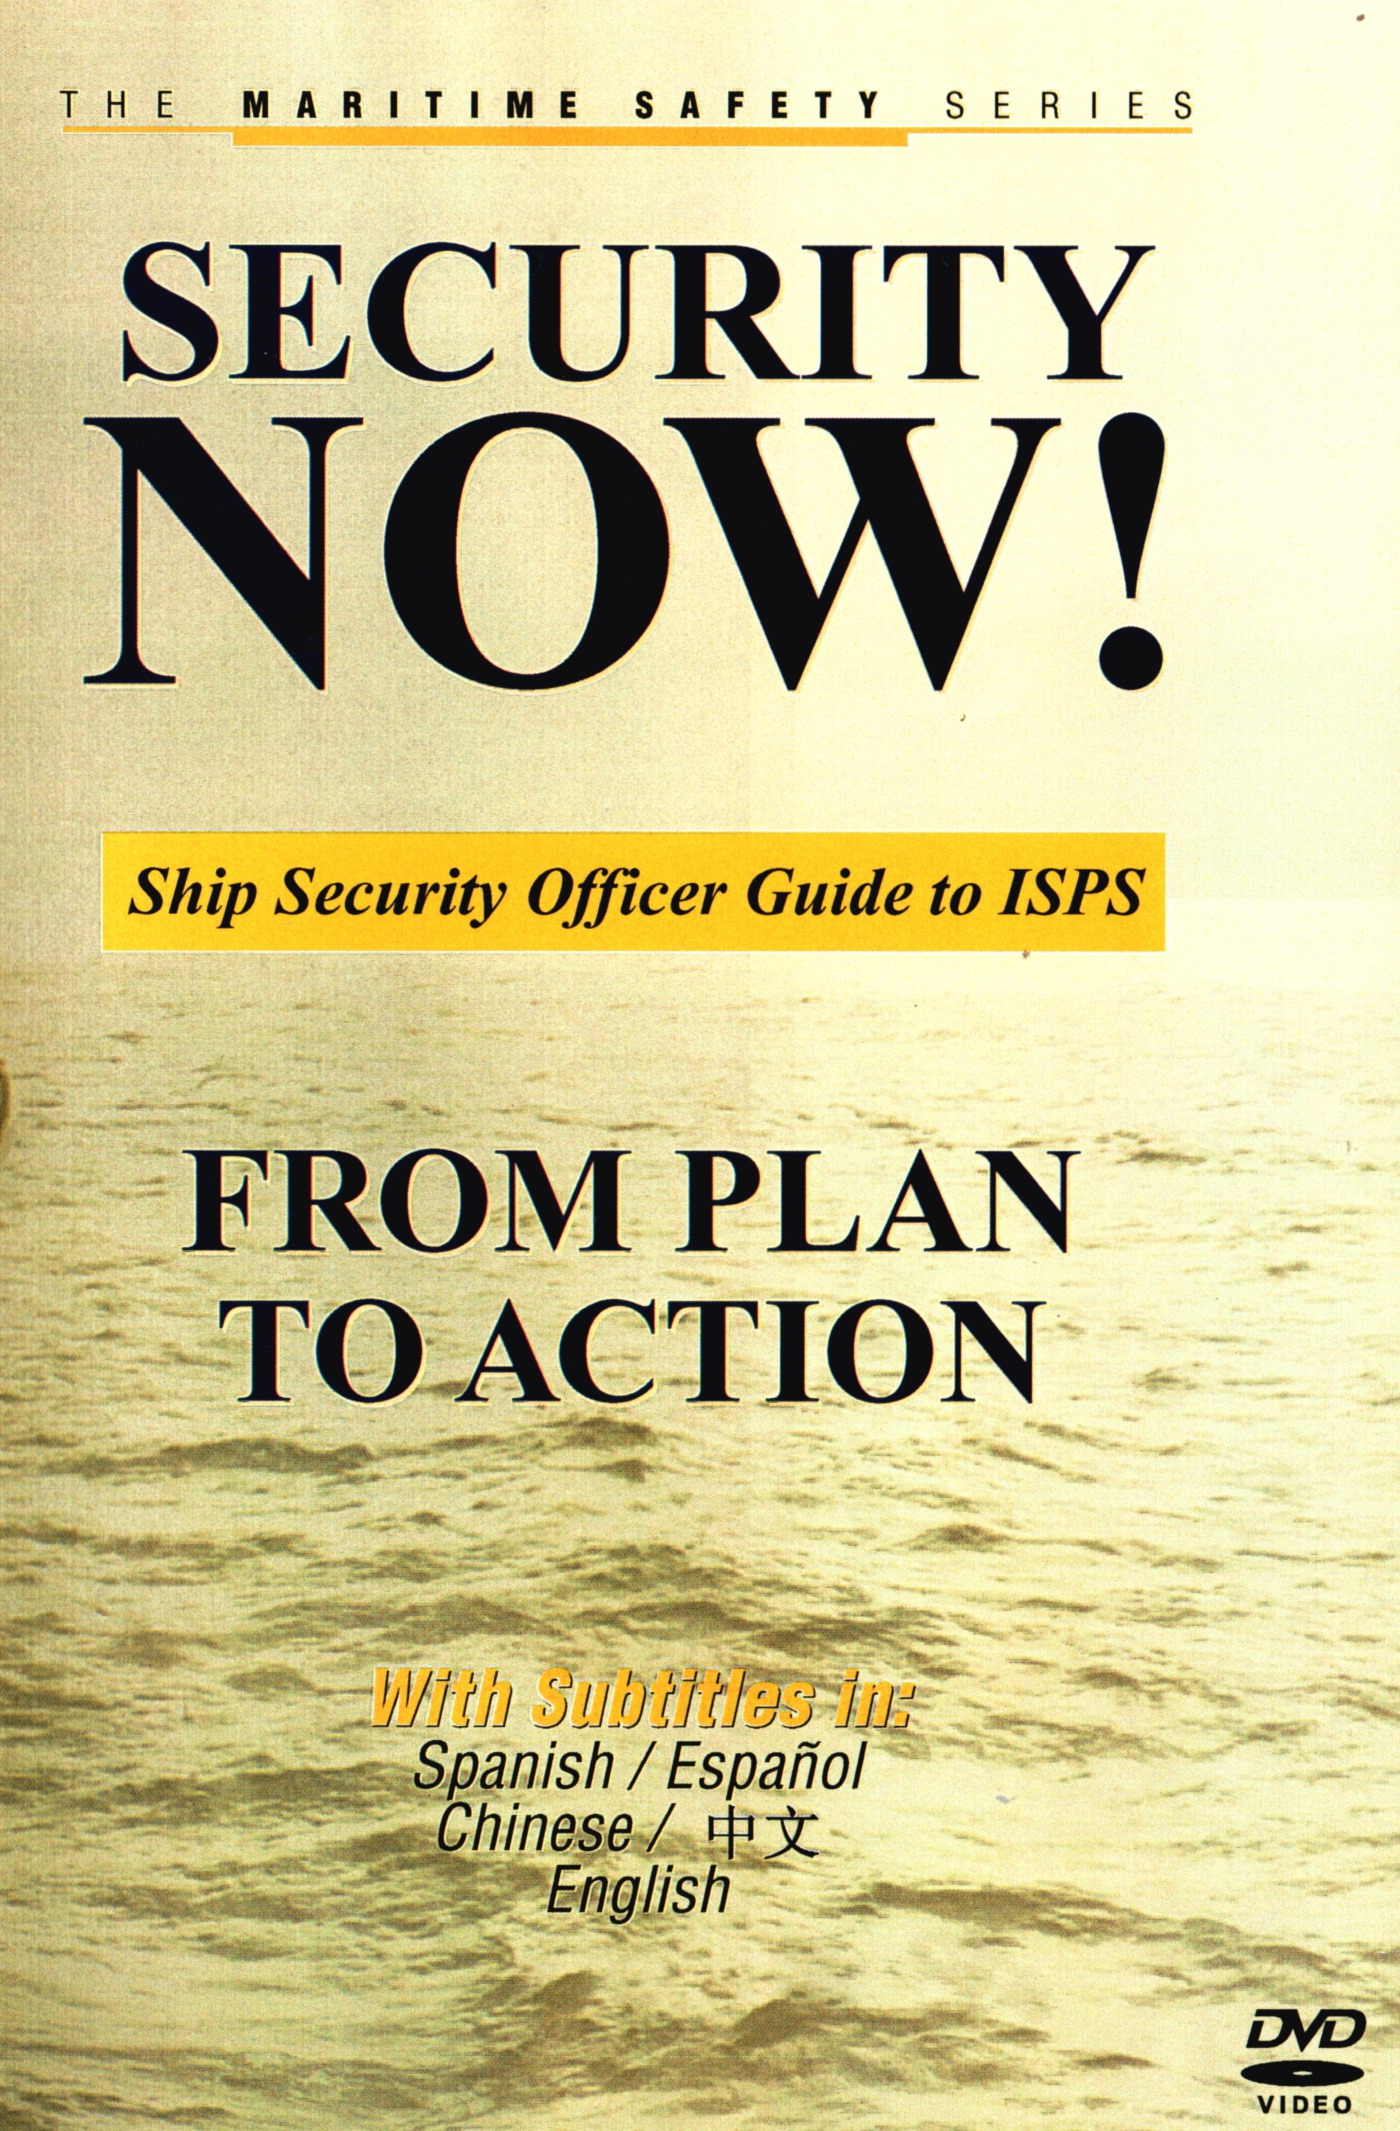 Security NOW! From Plan to Action